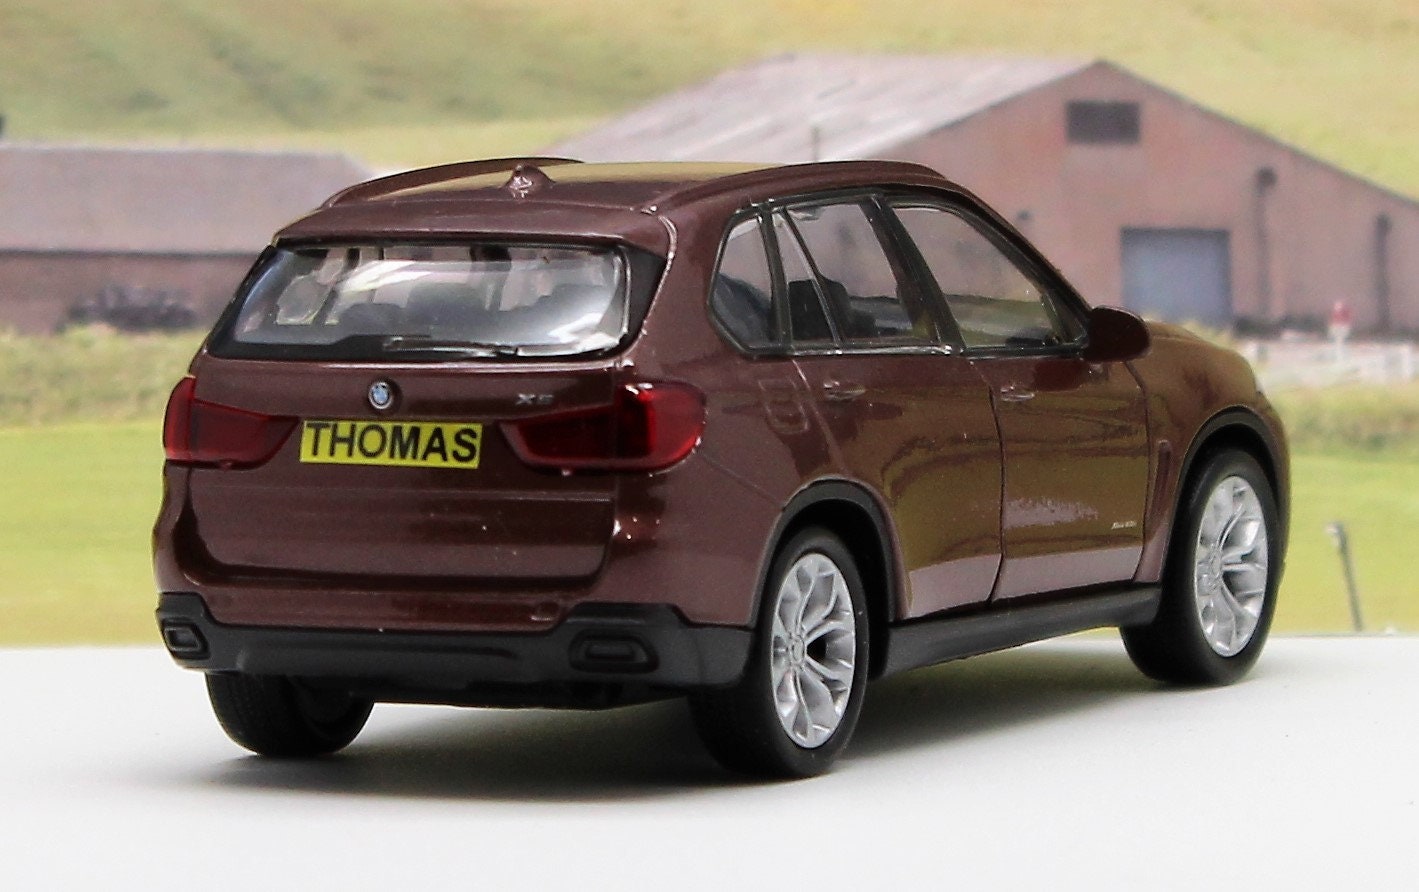 PERSONALISED PLATES Bronze BMW X5 Boys Toy Model Dad Car Present Boxed 